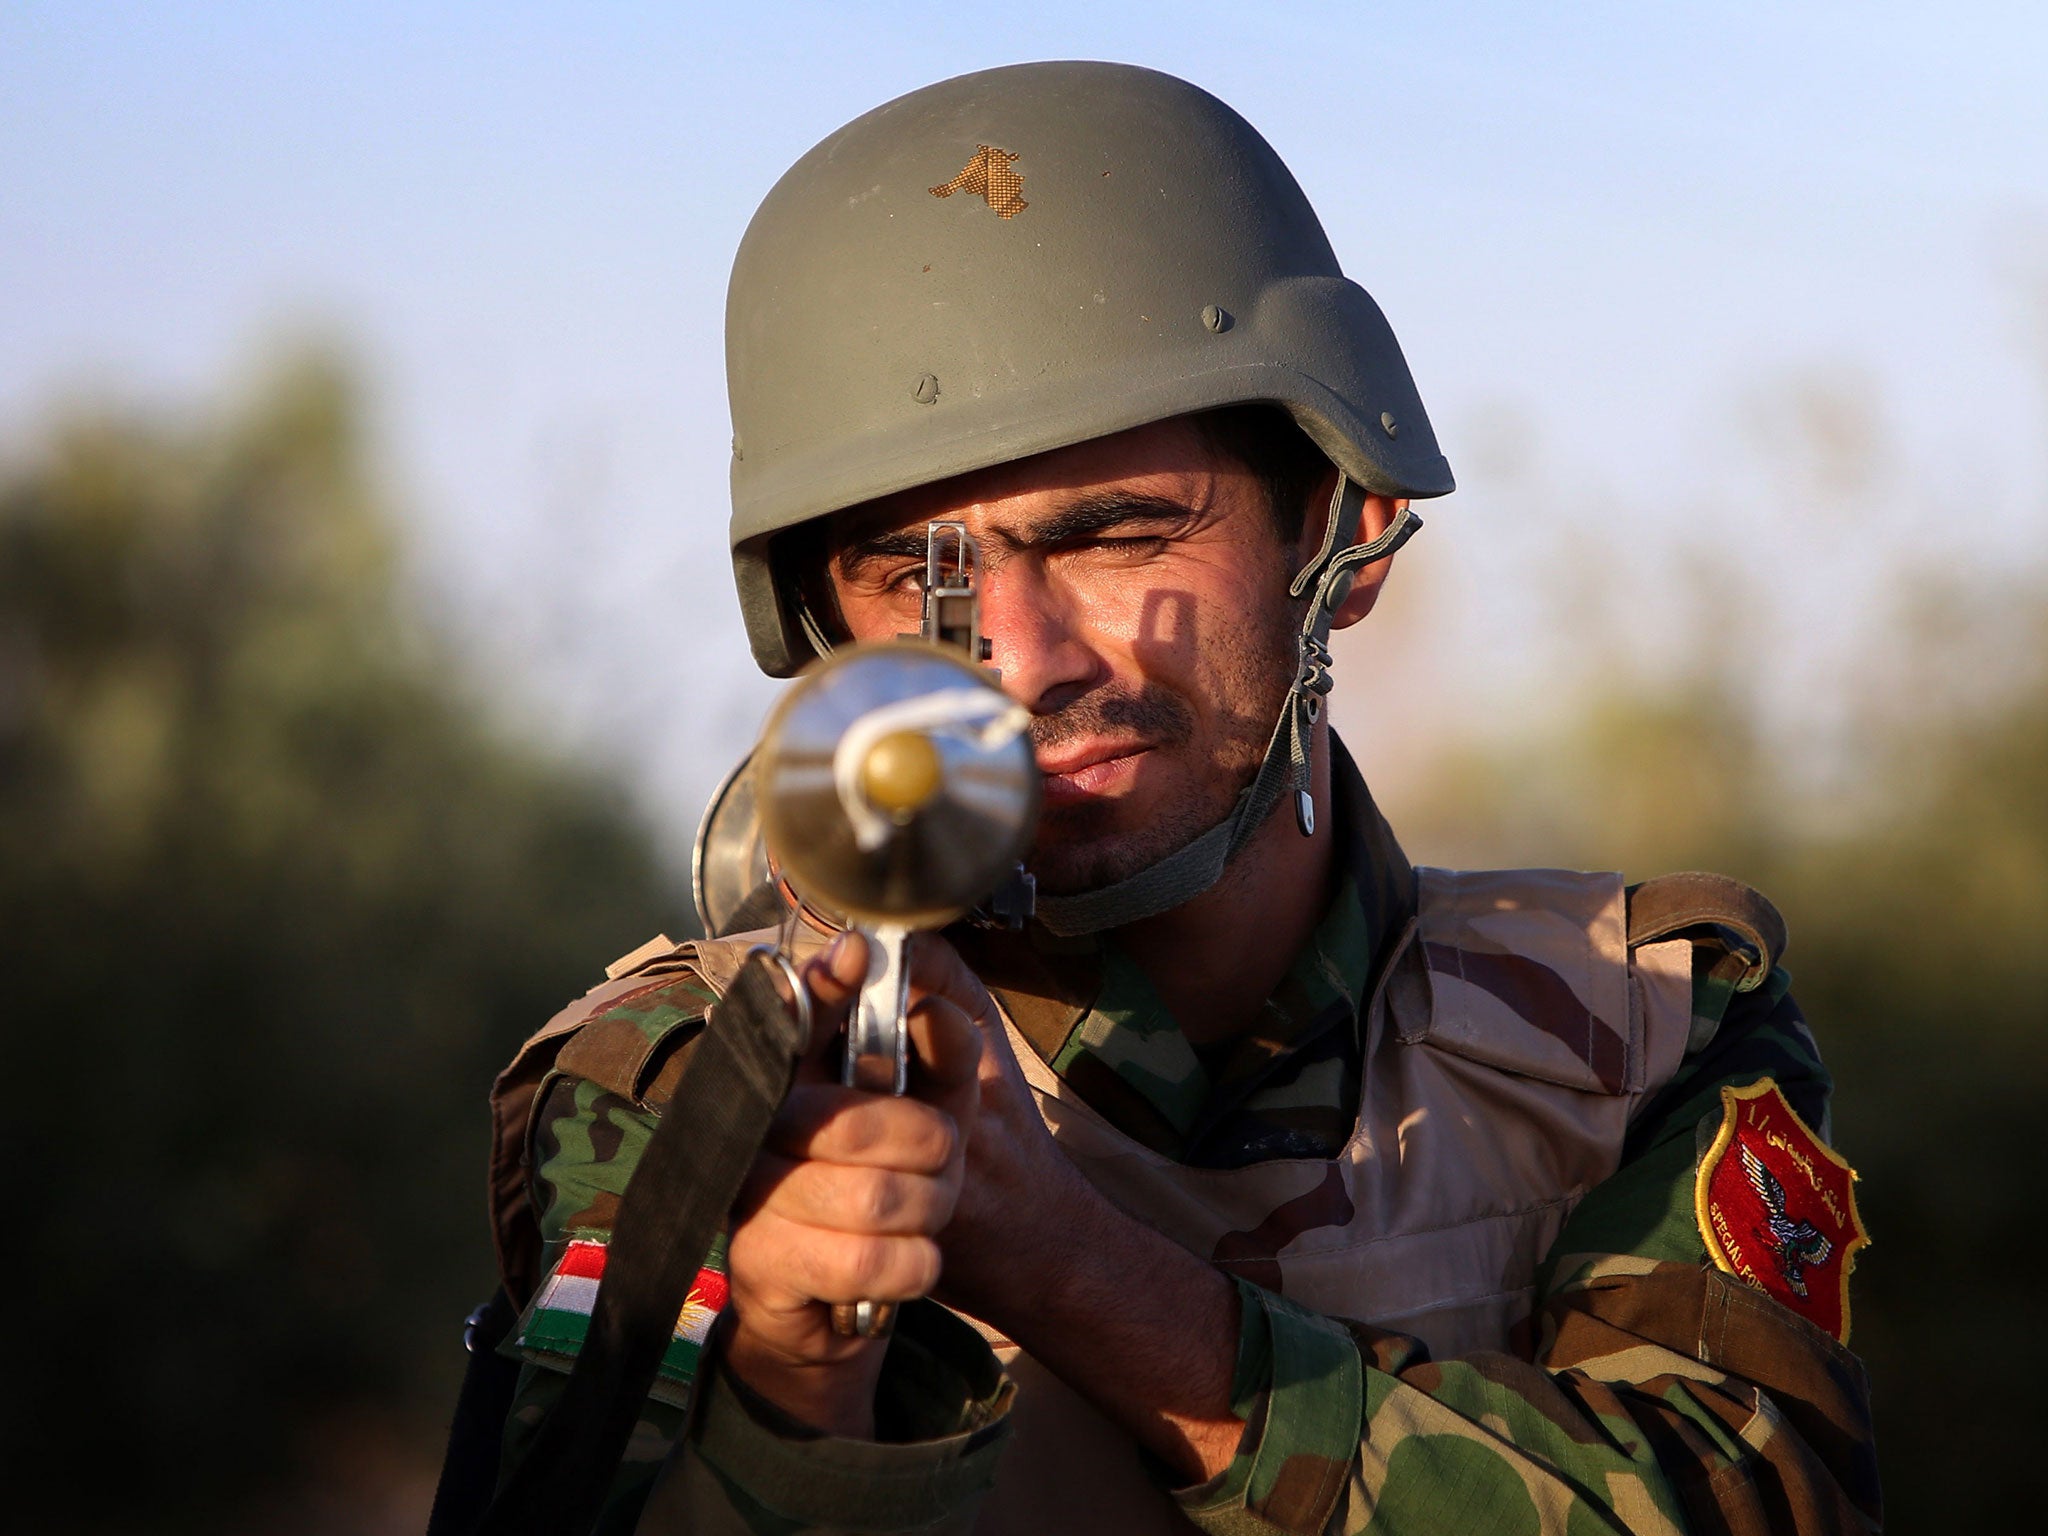 A Kurdish Peshmerga fighter poses with his weapon on the front line in Makhmur, Iraq. The Peshmerga are fighting to protect Kurdistan – something volunteers may not fully appreciate, they say